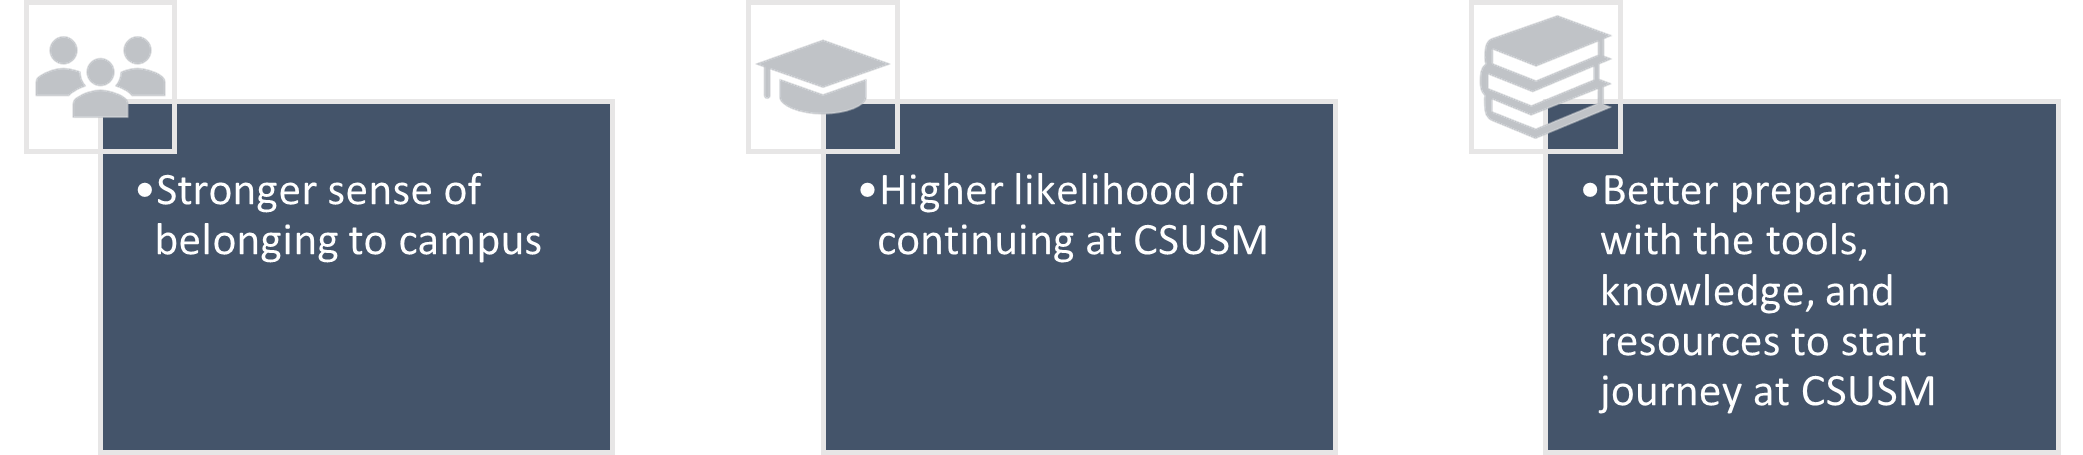 Stronger sense of belonging to campus. Higher likelihood of continuing at CSUSM. Better preparation with the tools, knowledge, and resources to start journey at CSUSM.